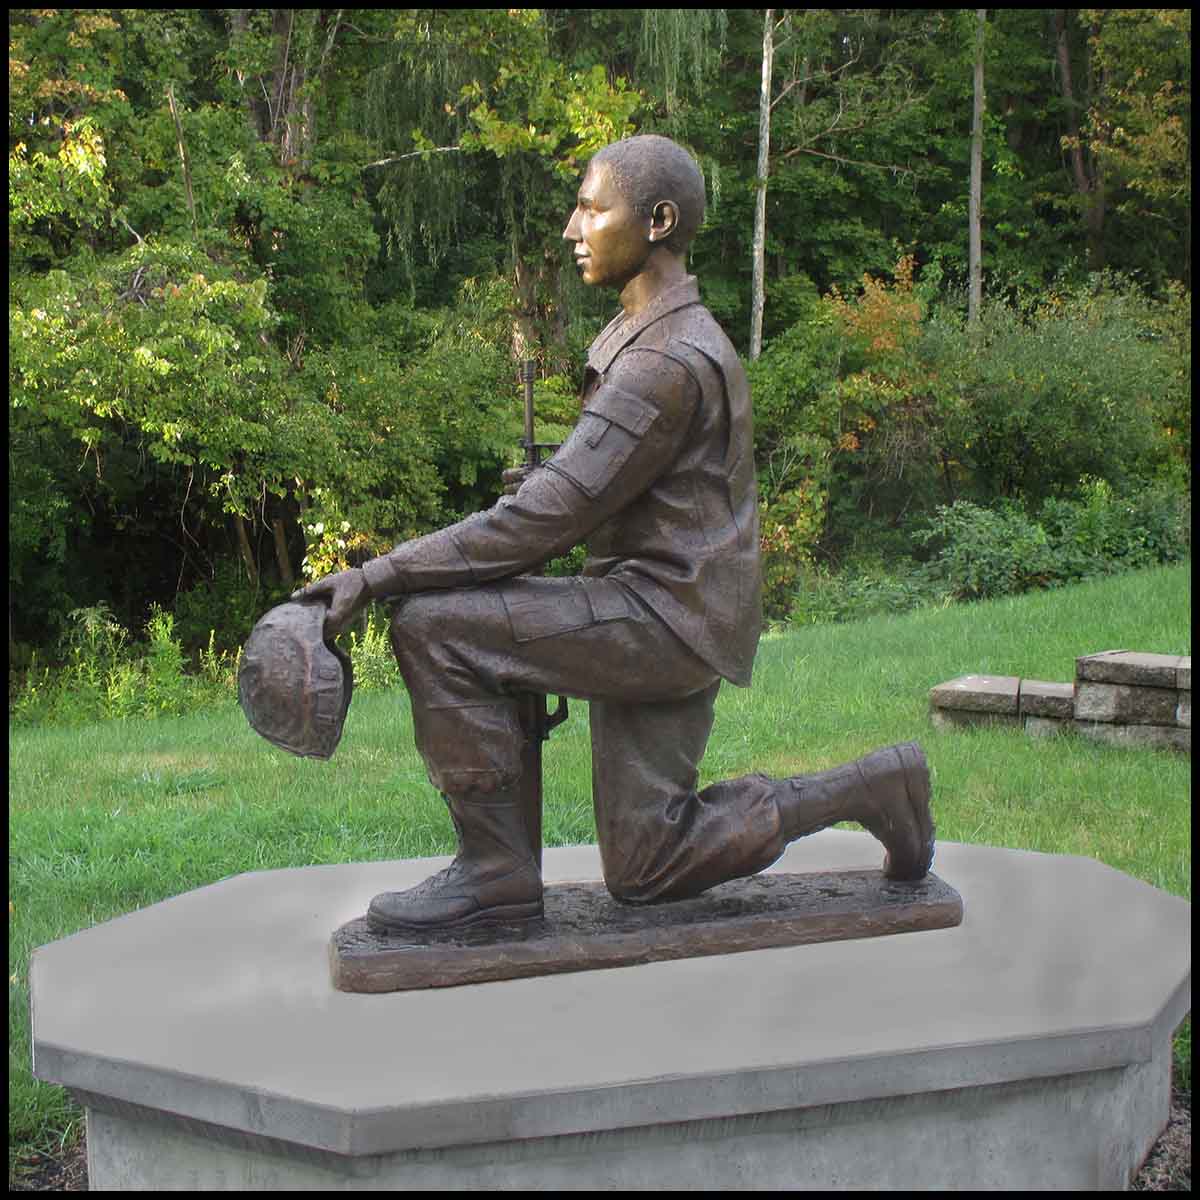 exterior photo of bronze sculpture of Johnny Roberge kneeling and in uniform on concrete base in a park